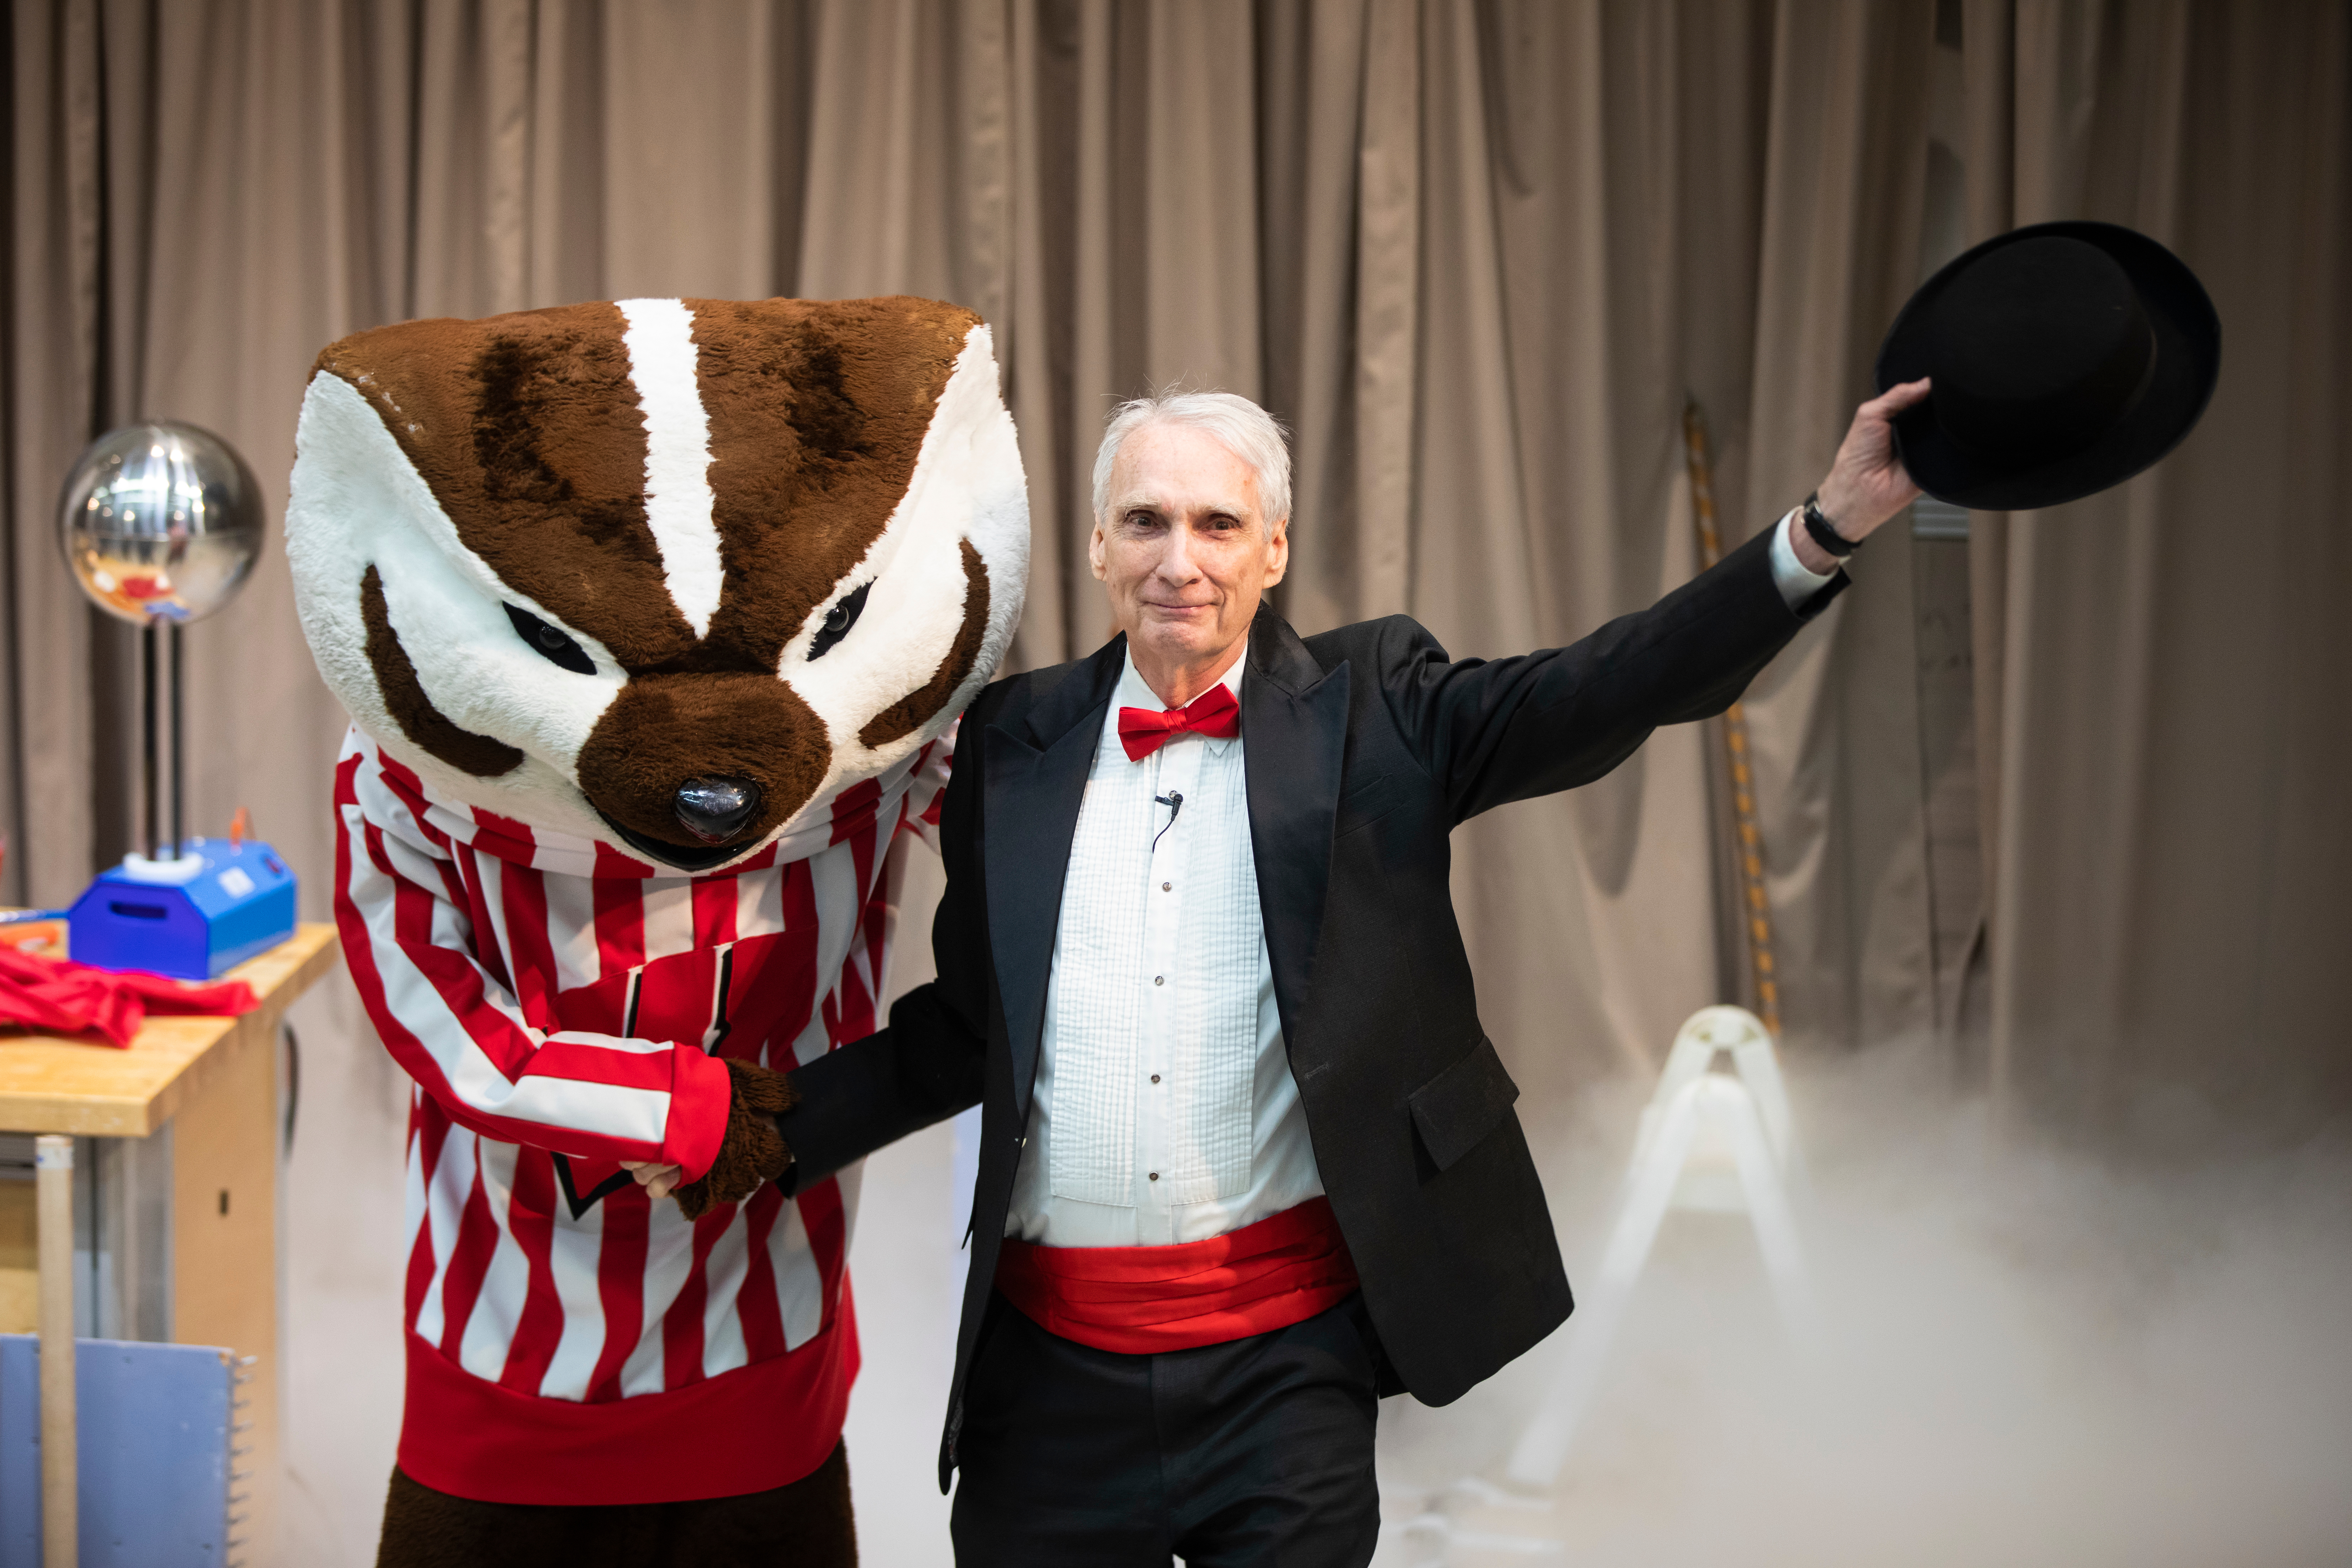 Bucky Badger shakes Clint Sprott's hand as Clint waves to the audience with his hat raised